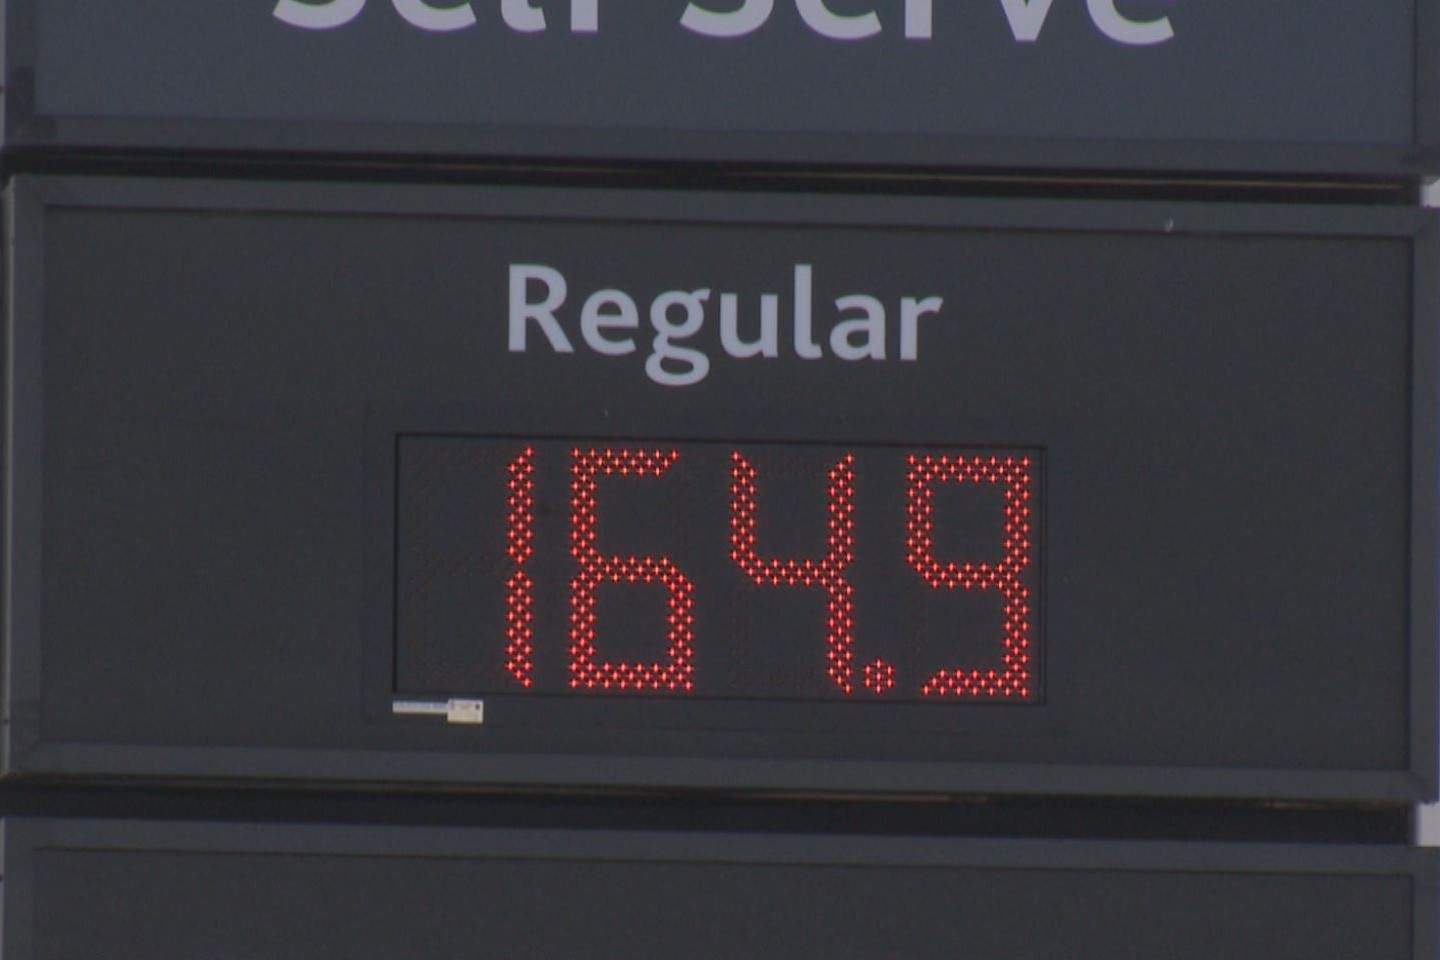 Gas prices in B.C. Interior predicted to rise 10 cents a litre